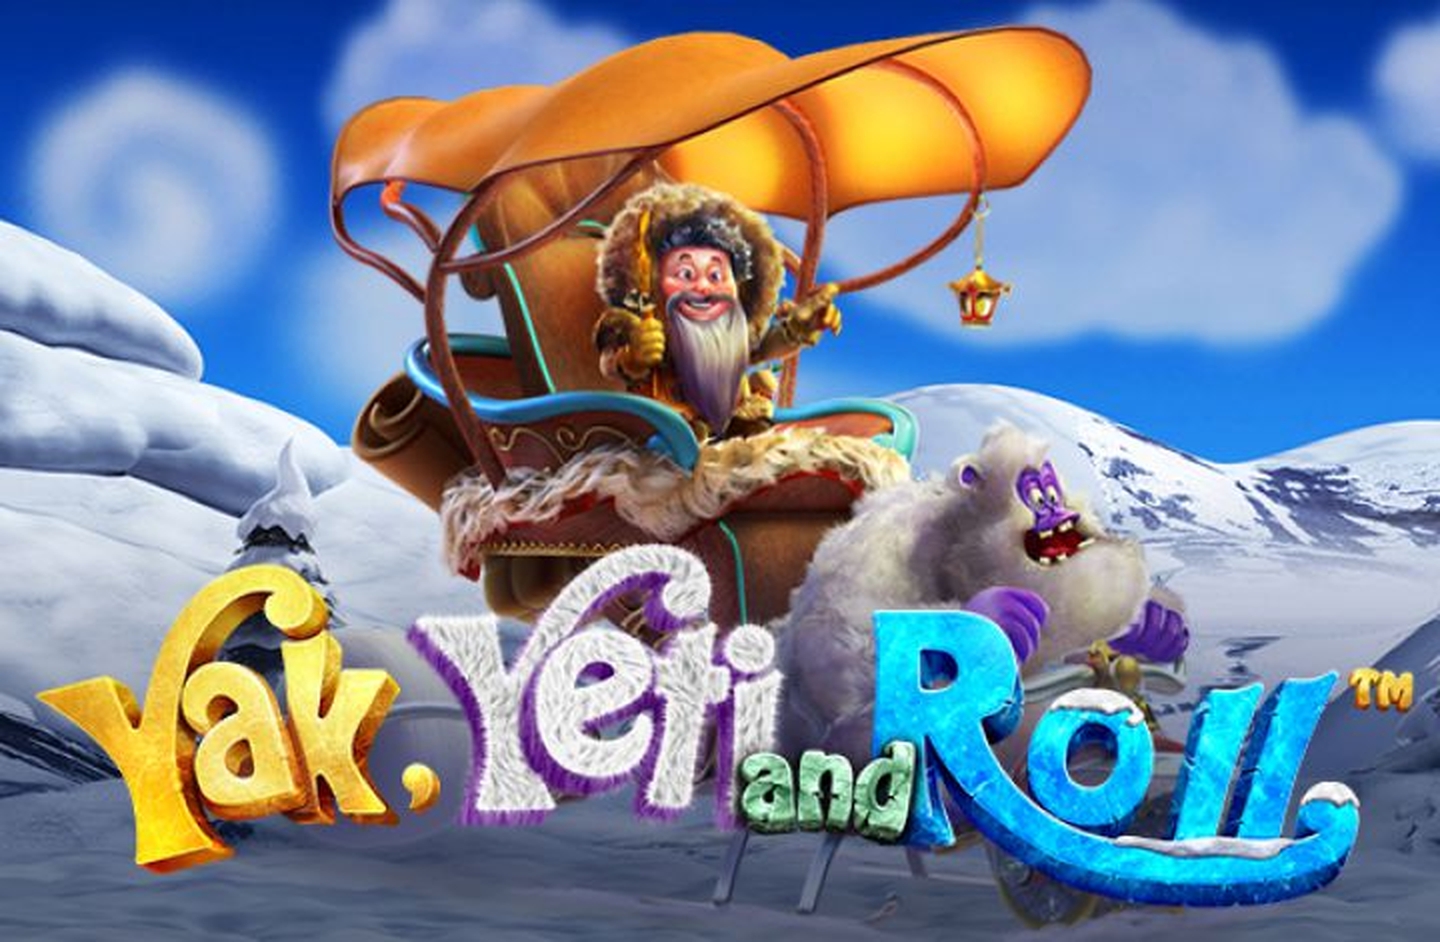 The Yak Yeti and Roll Online Slot Demo Game by Betsoft